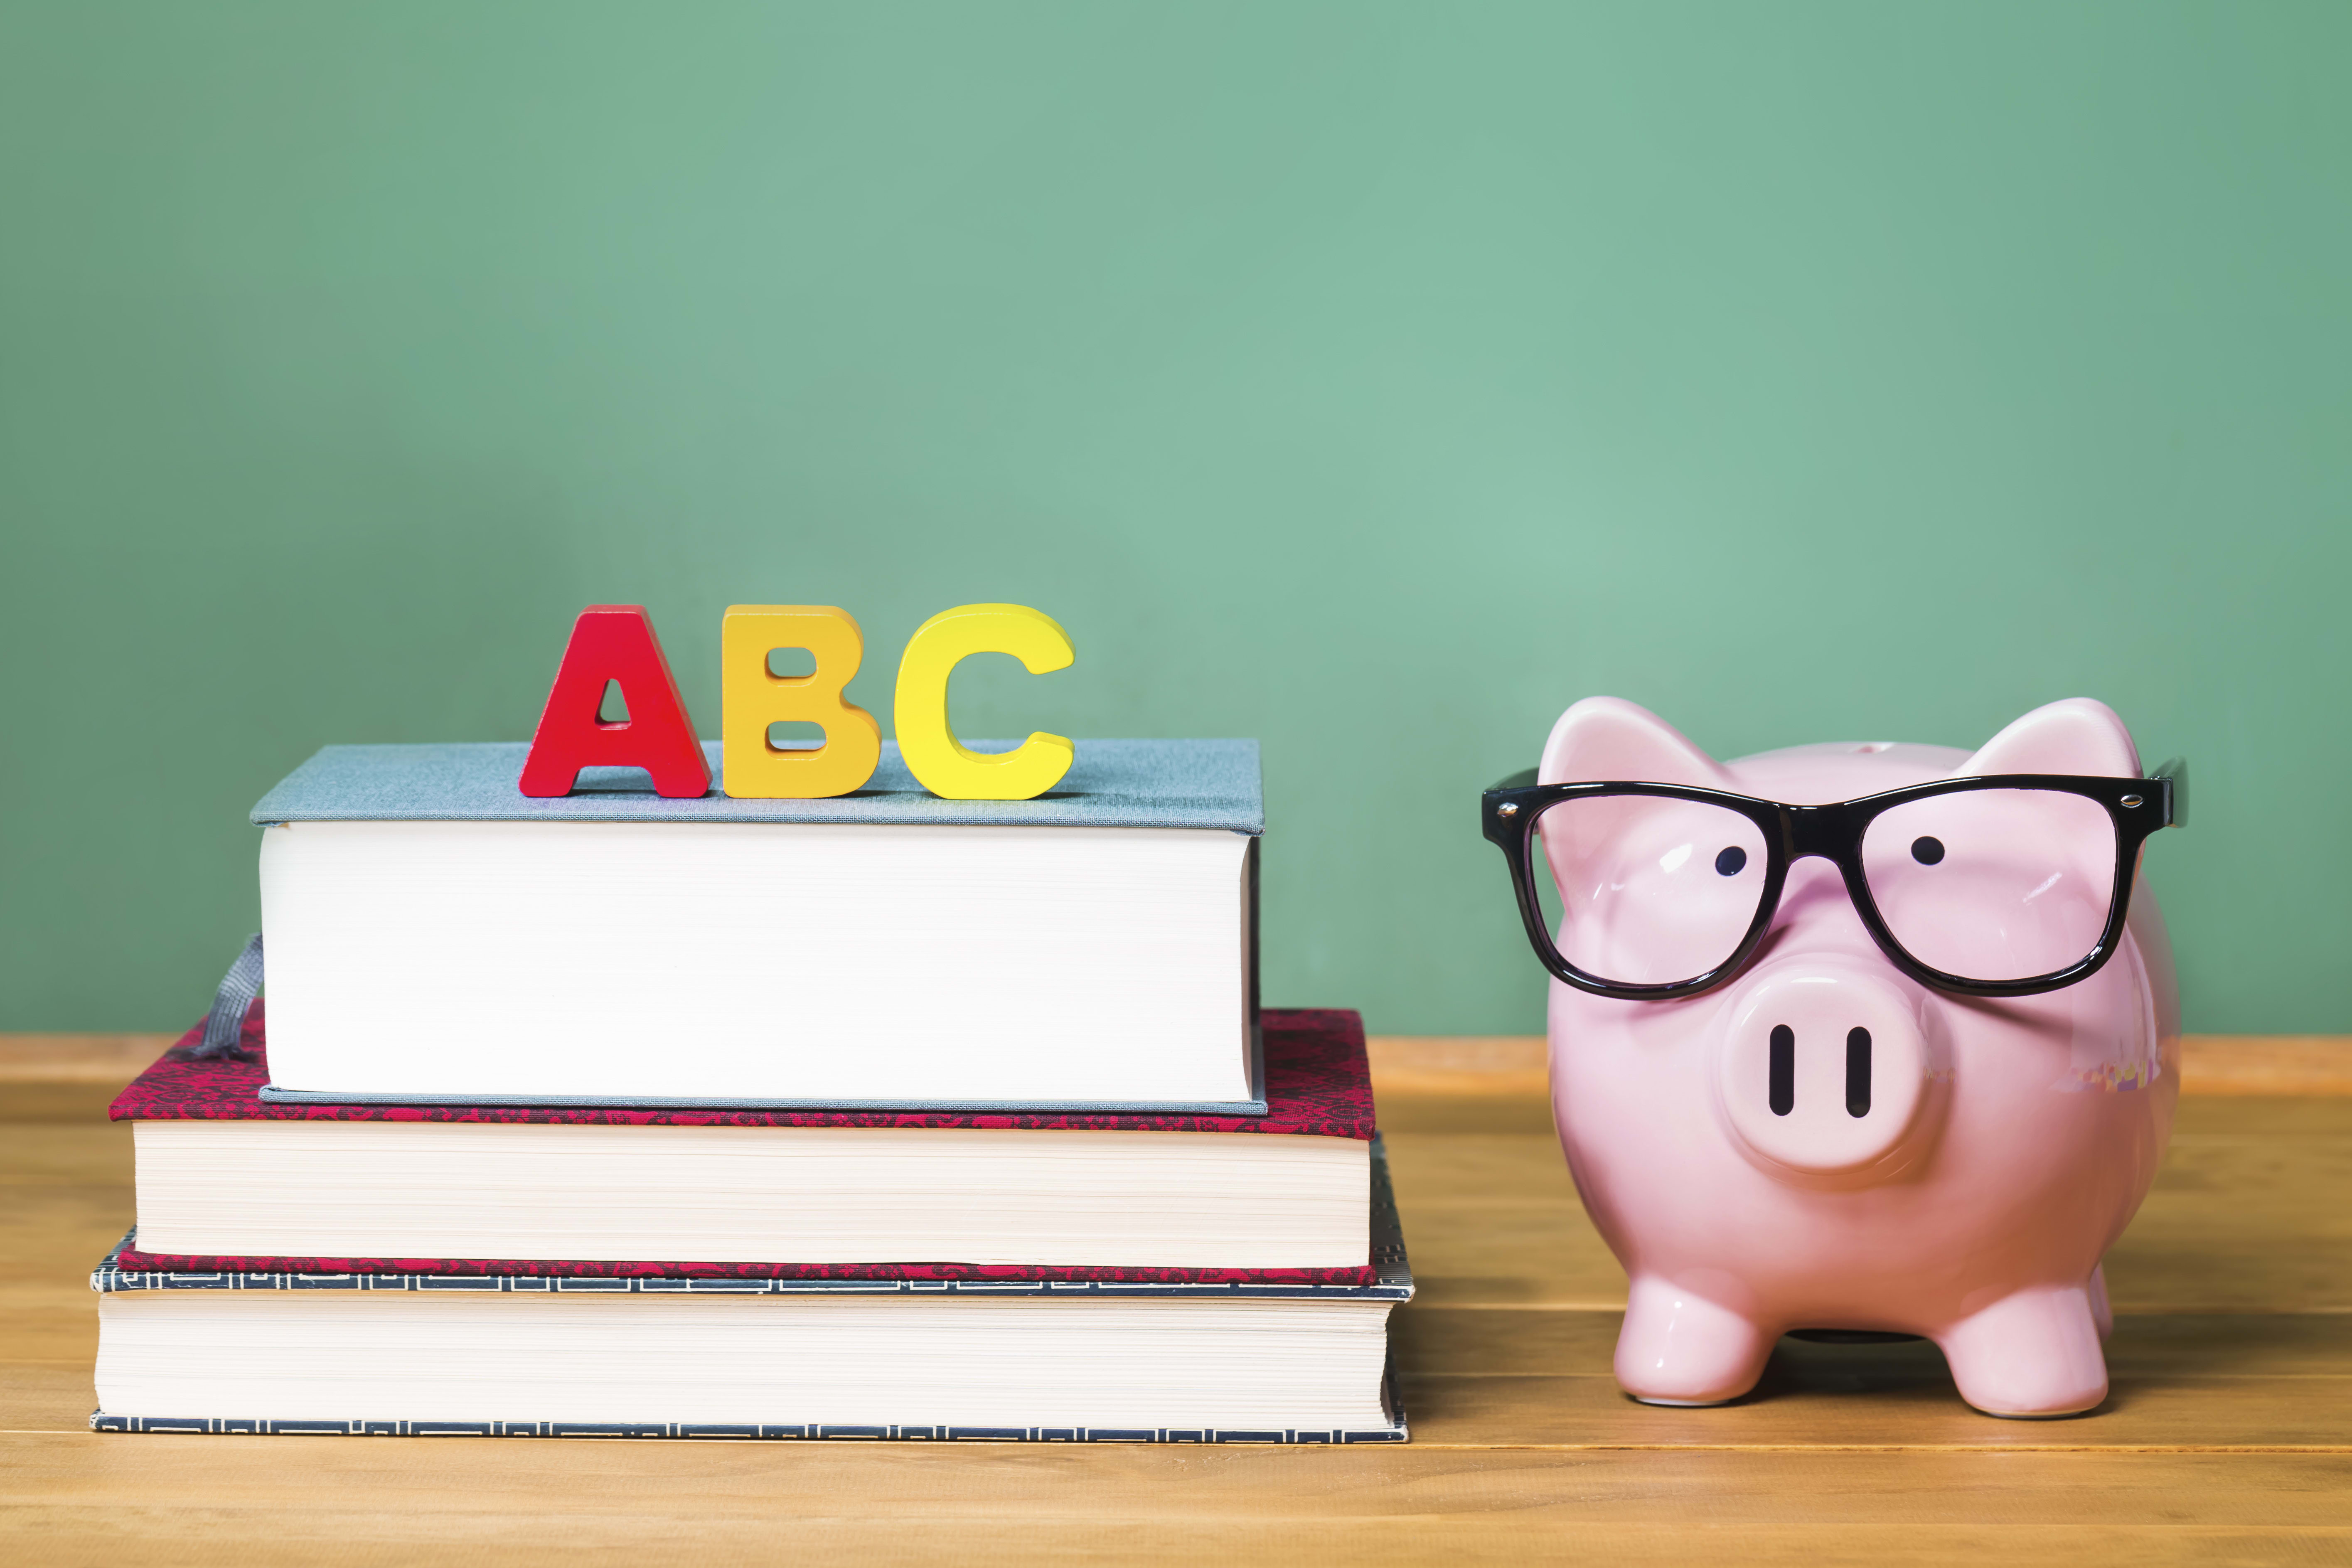 School theme with ABCs and pink piggy bank on top of books with chalkboard in the background